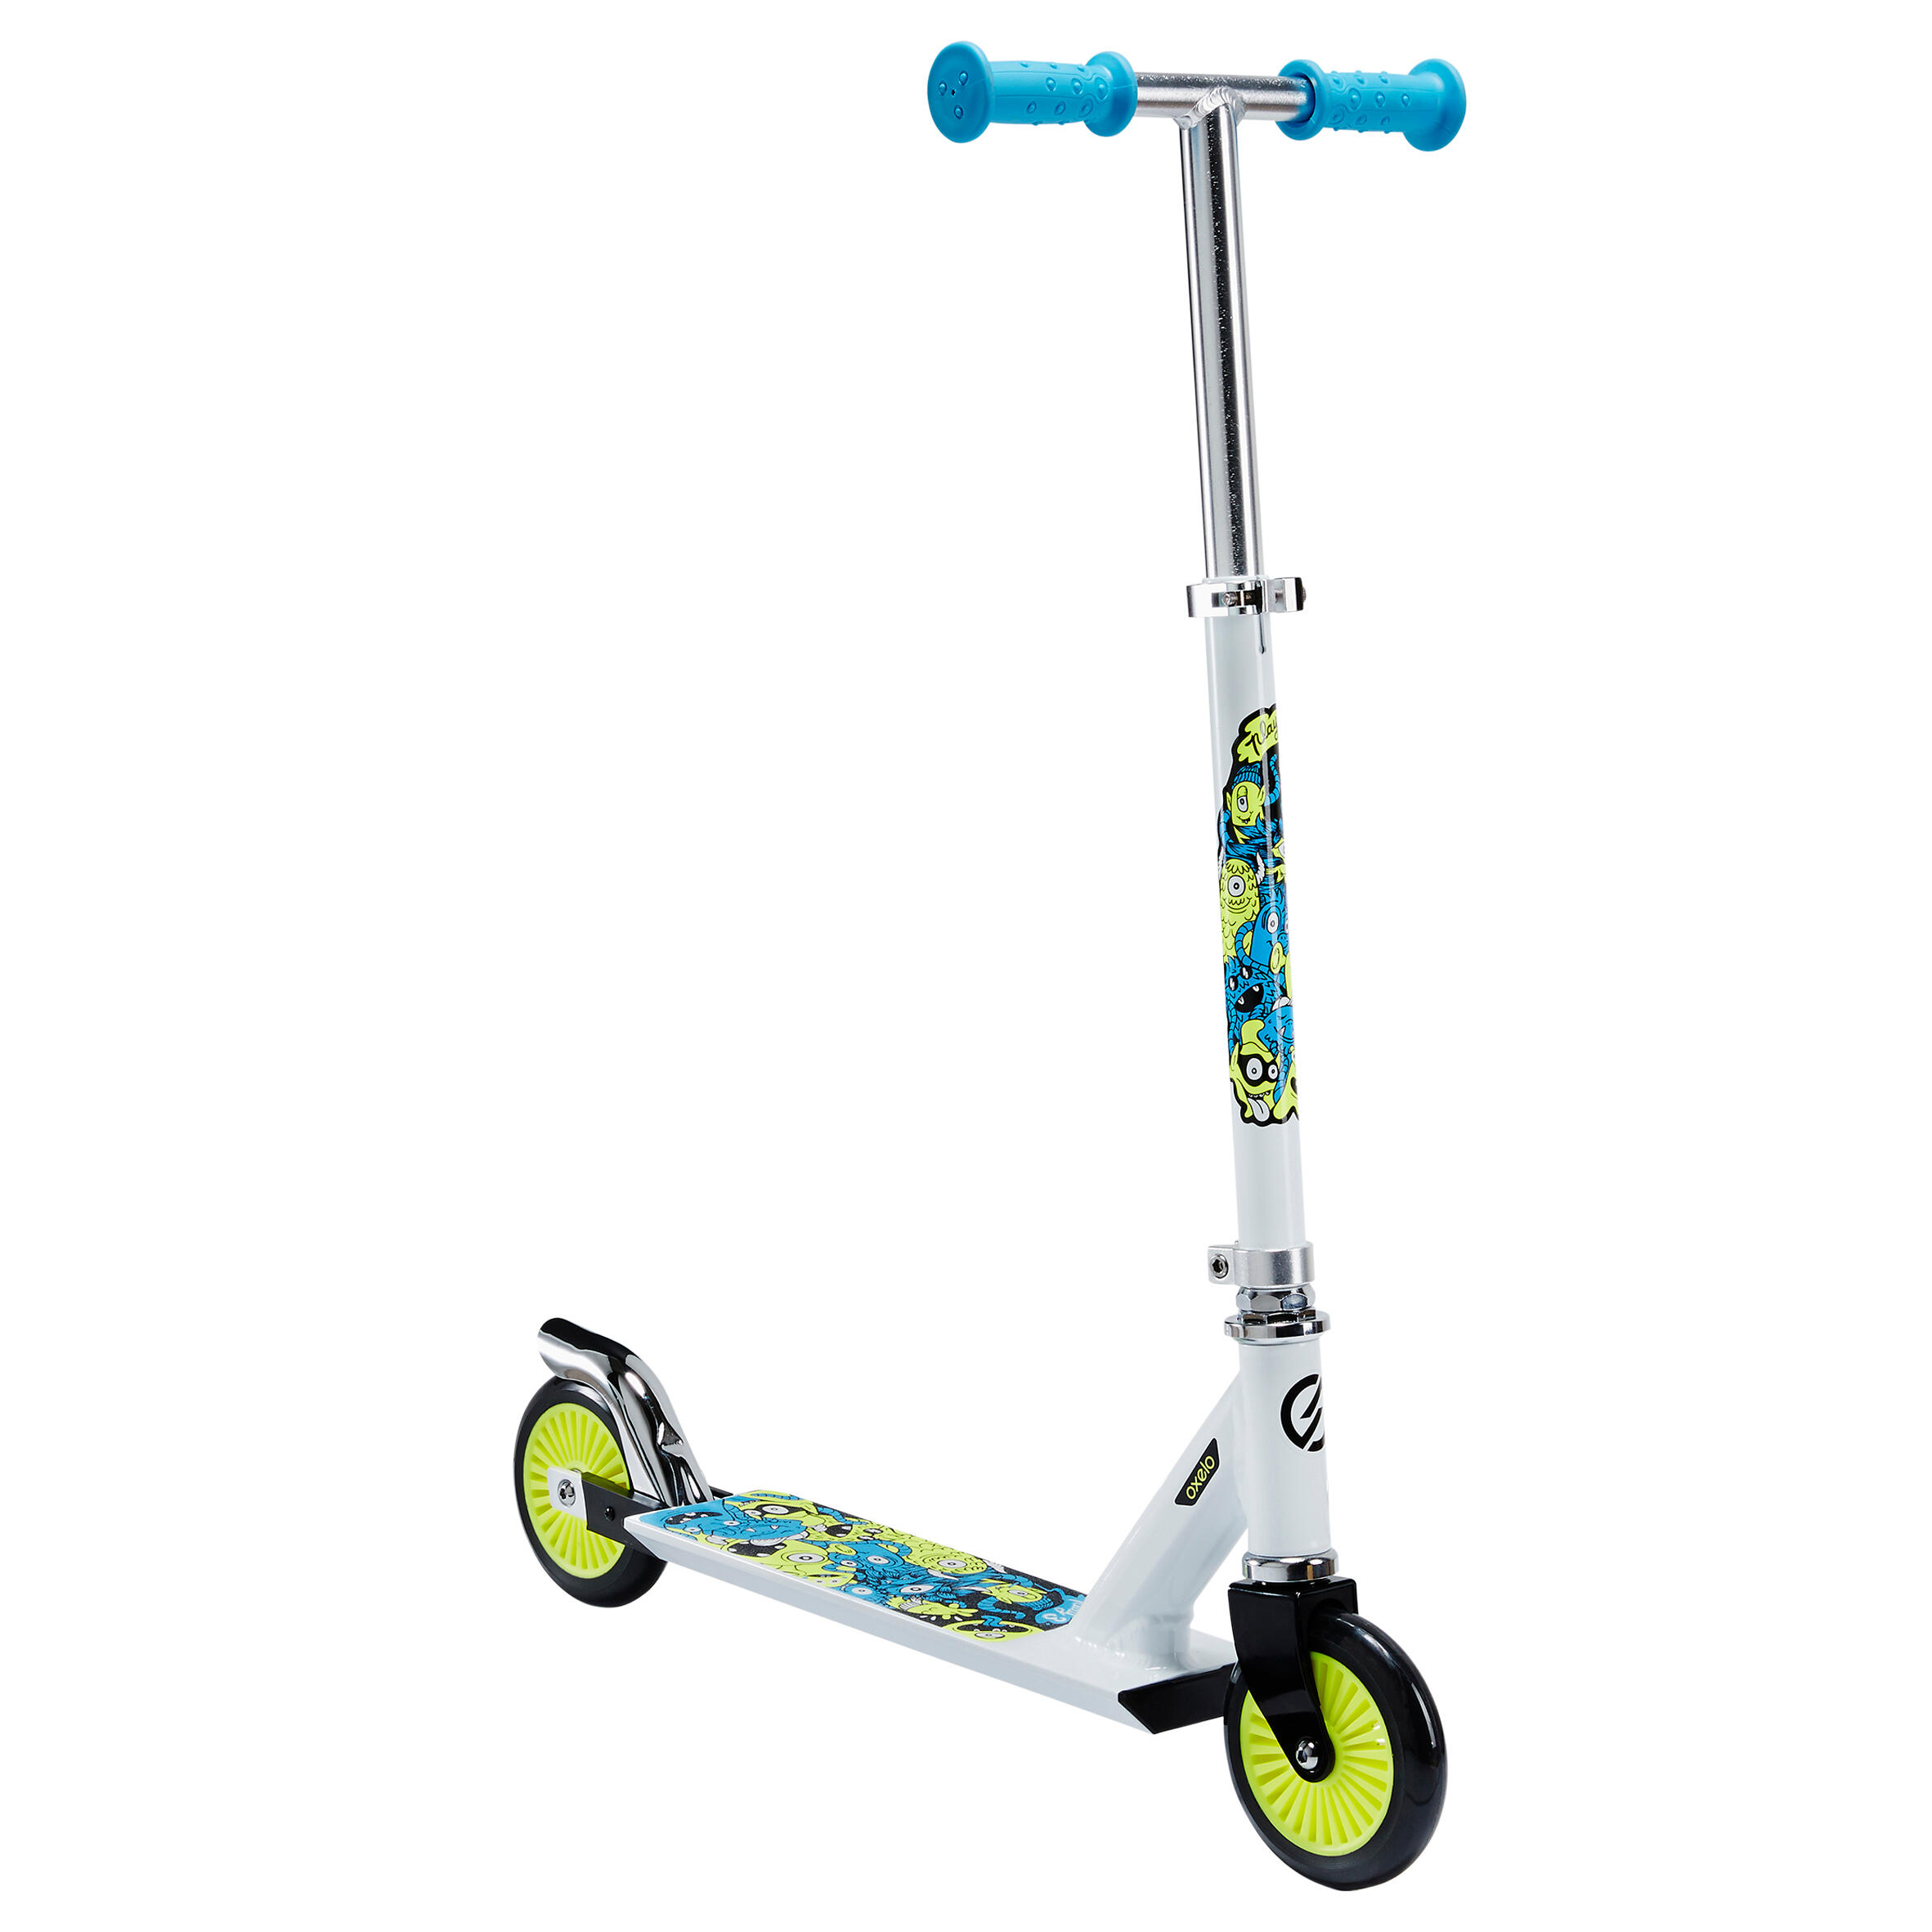 scooter for kids decathlon